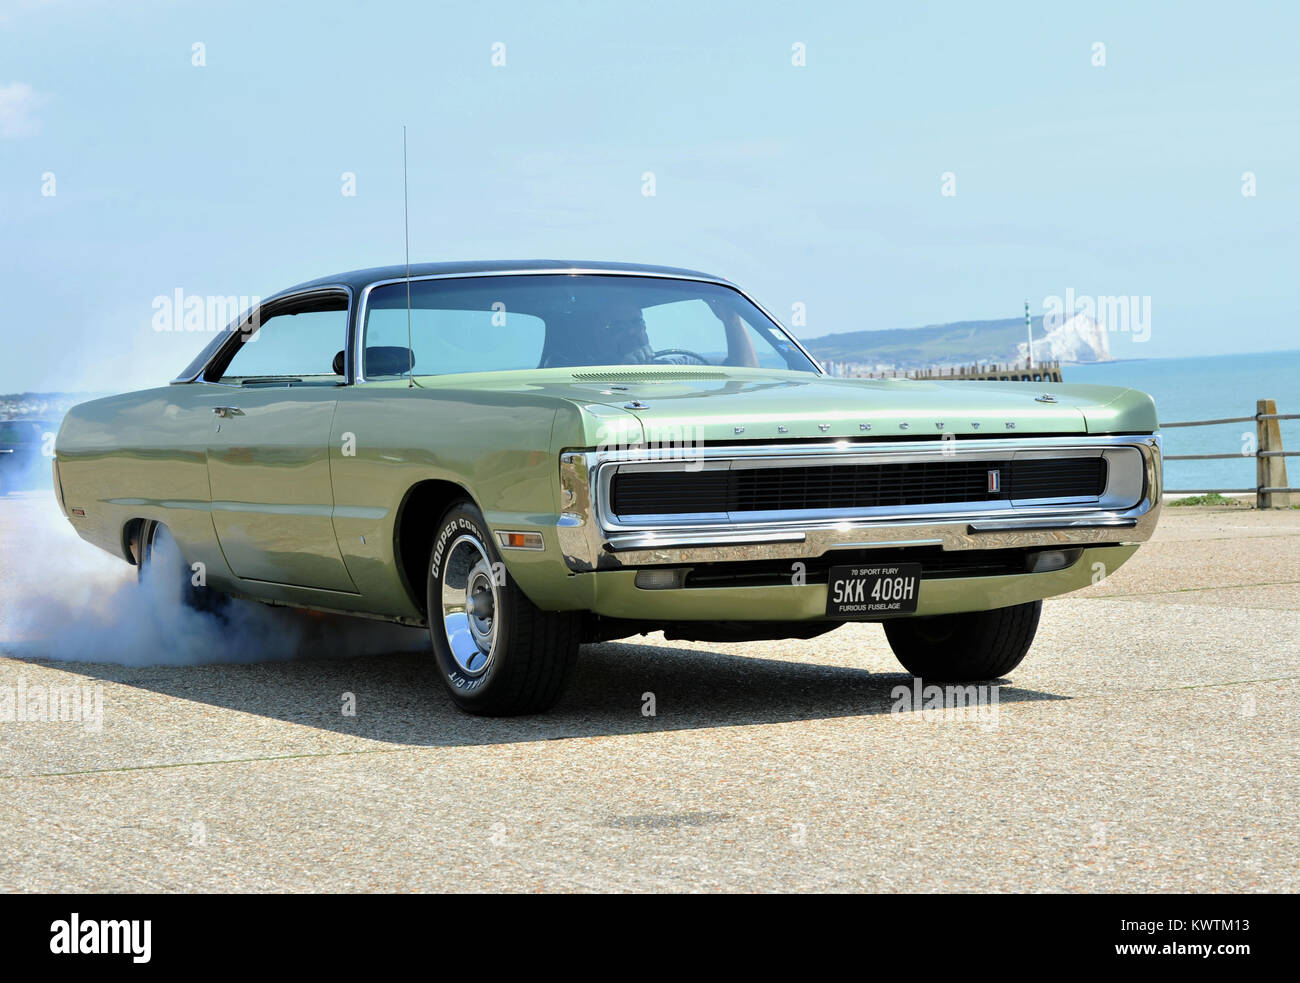 1970 Plymouth Sport Fury classic American Mopar muscle car Stock Photo